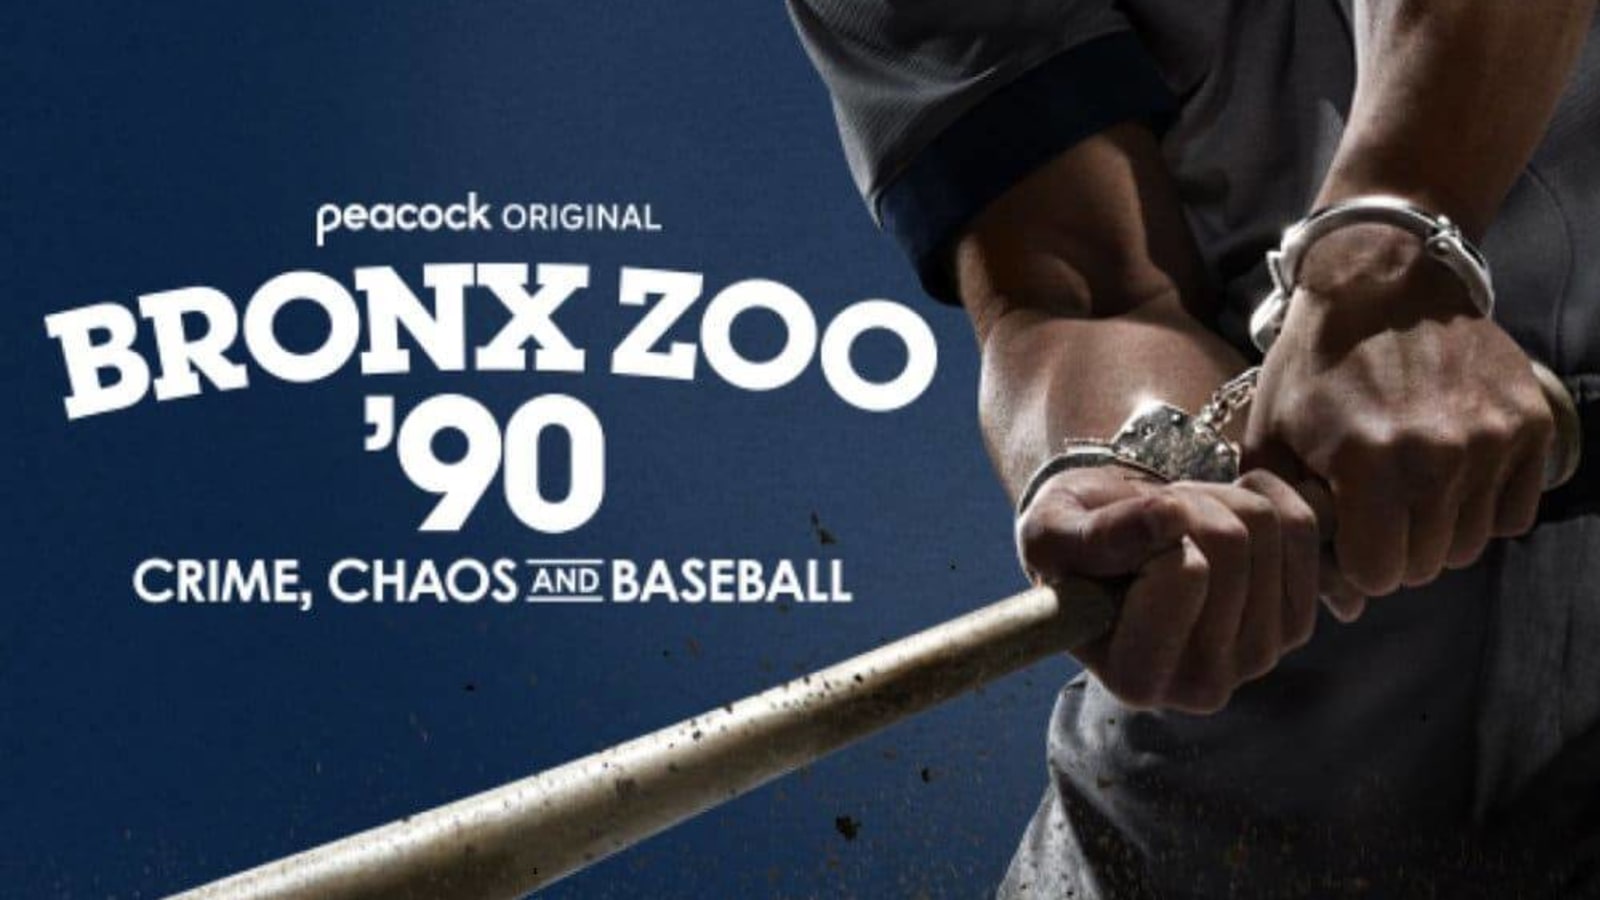 Bronx Zoo ’90: Crime, Chaos and Baseball director believes disastrous Yankees team paved way to ‘greatness’